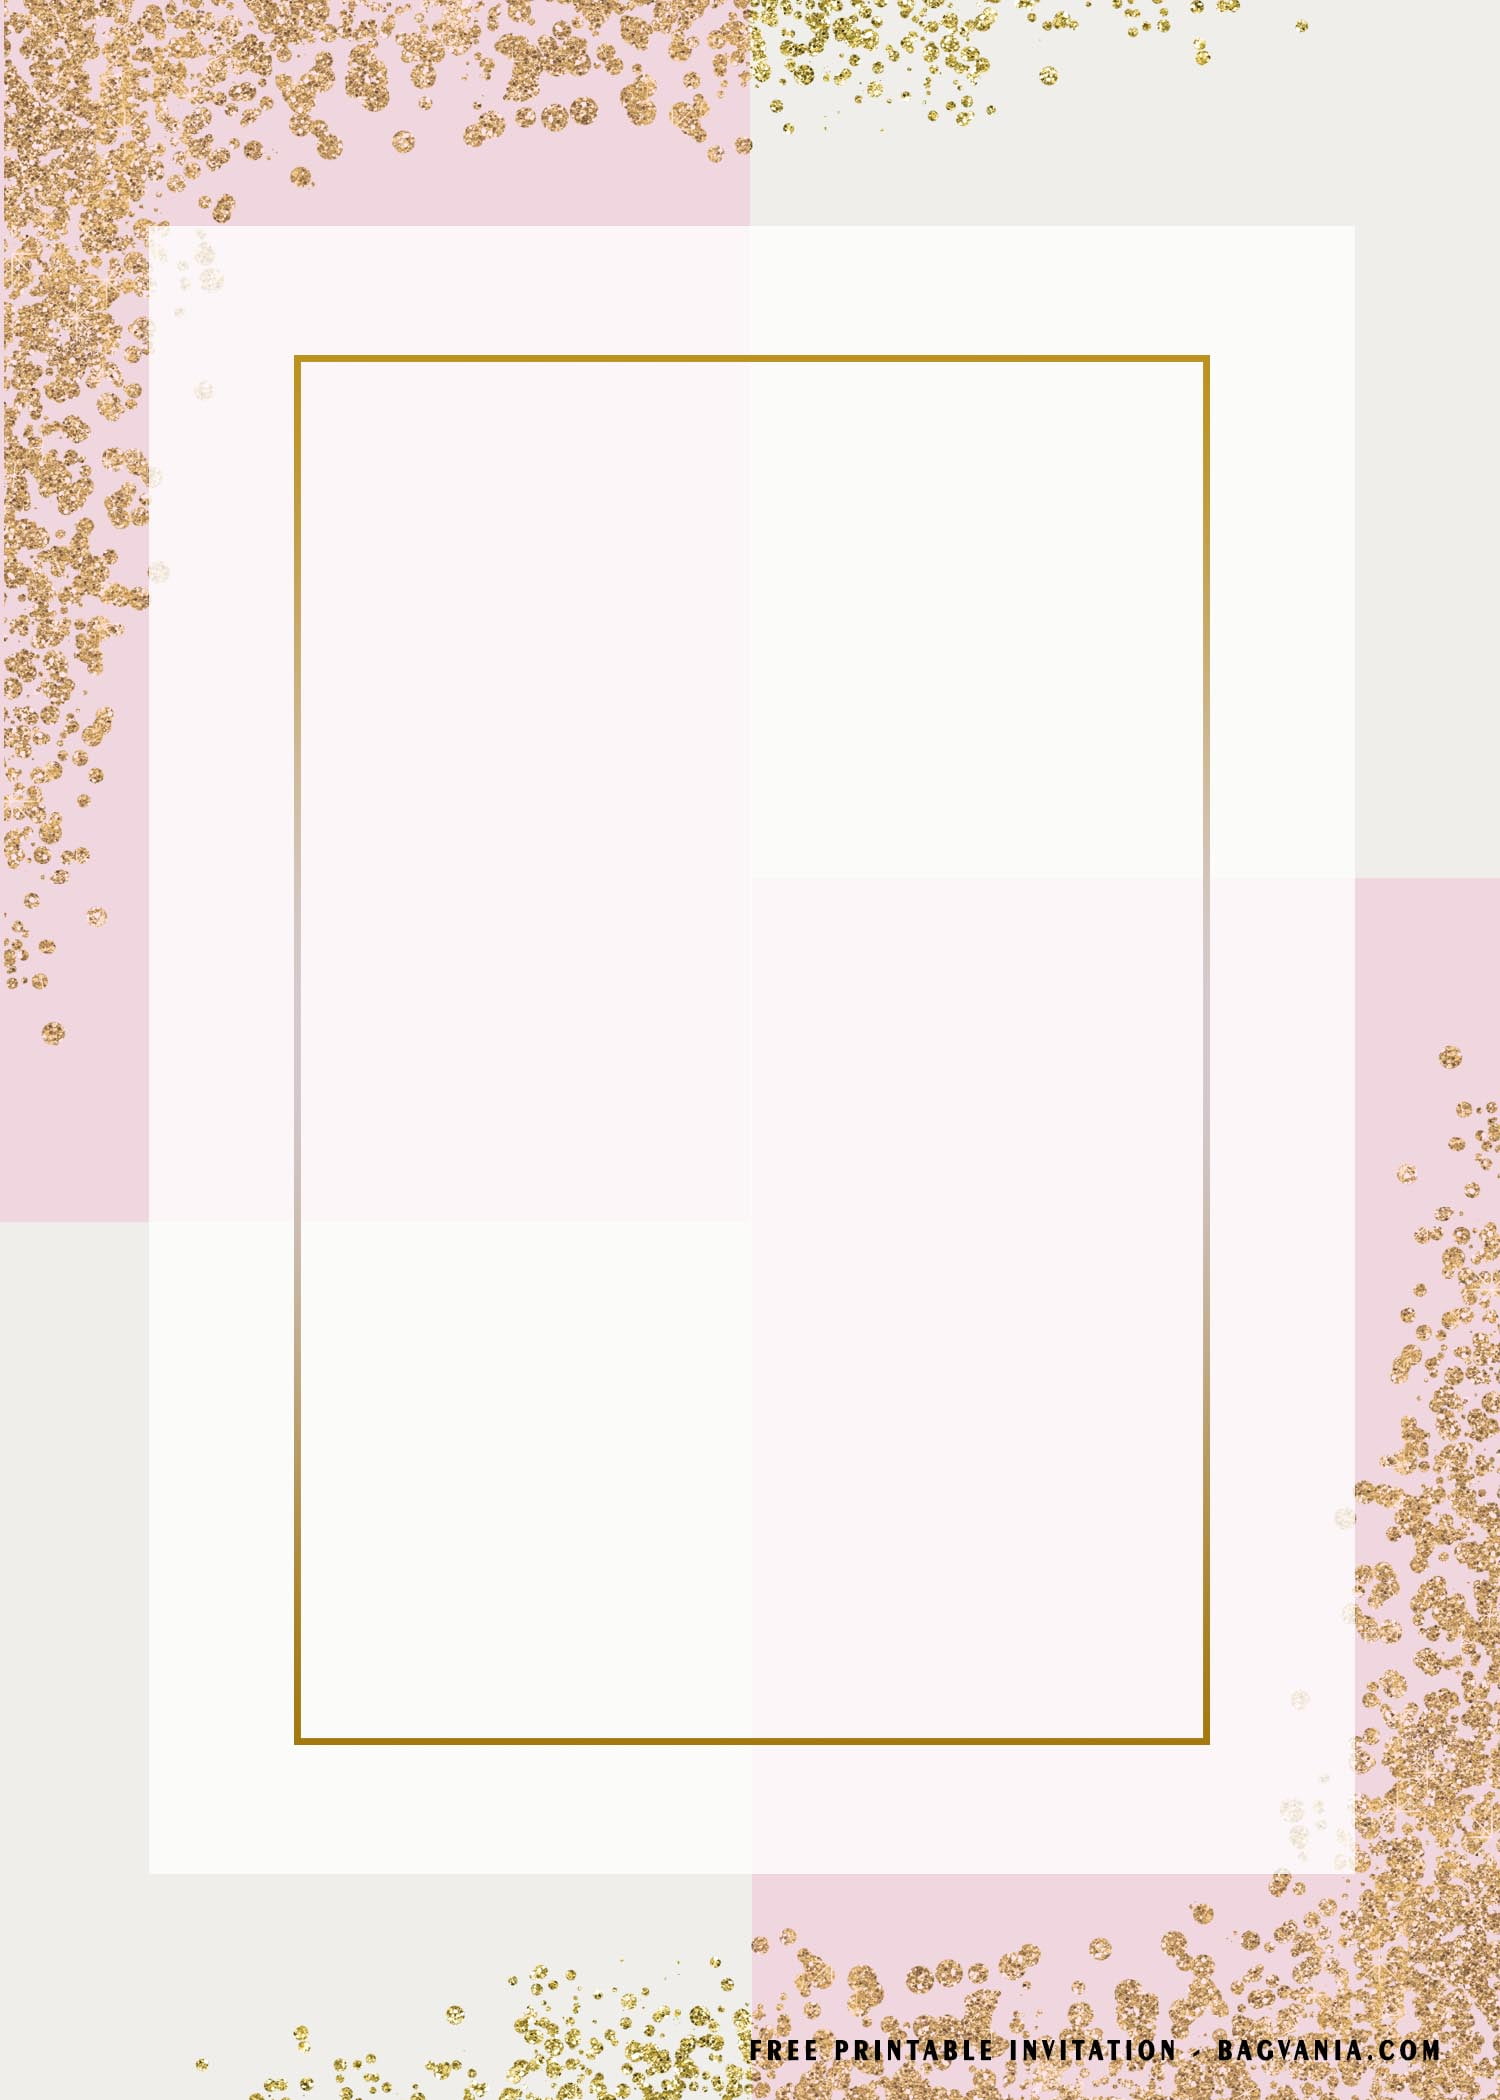 FREE Printable) – Blank Rectangle Birthday Invitation Templates Intended For Blank Templates For Invitations